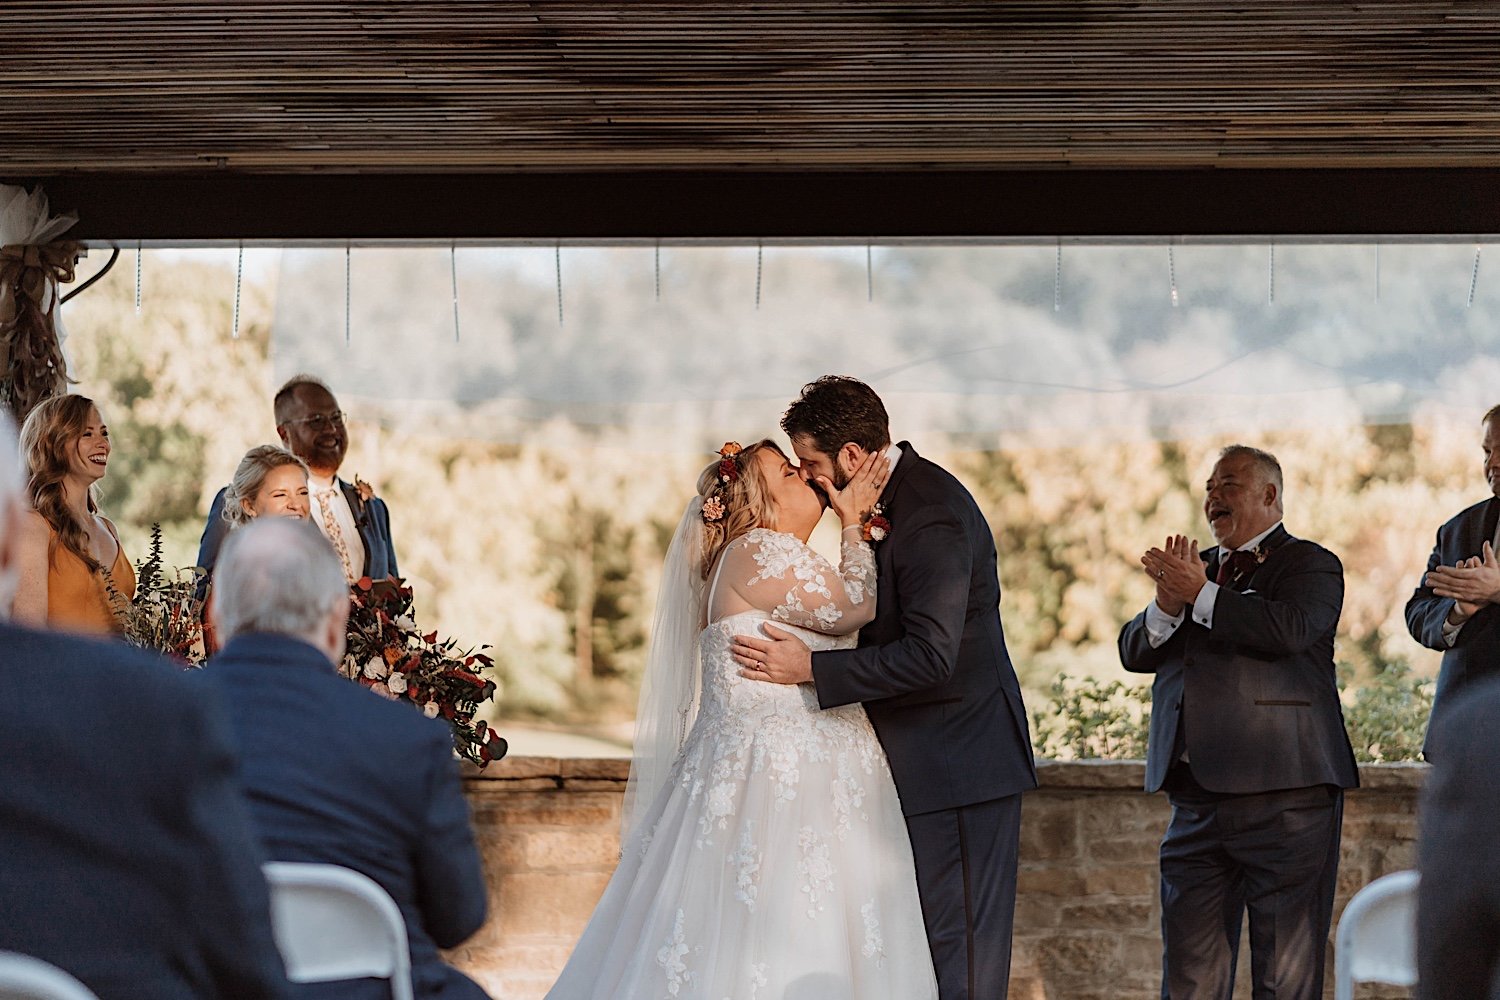 Bride and groom share first kiss at Lake Ellyn Boathouse wedding ceremony